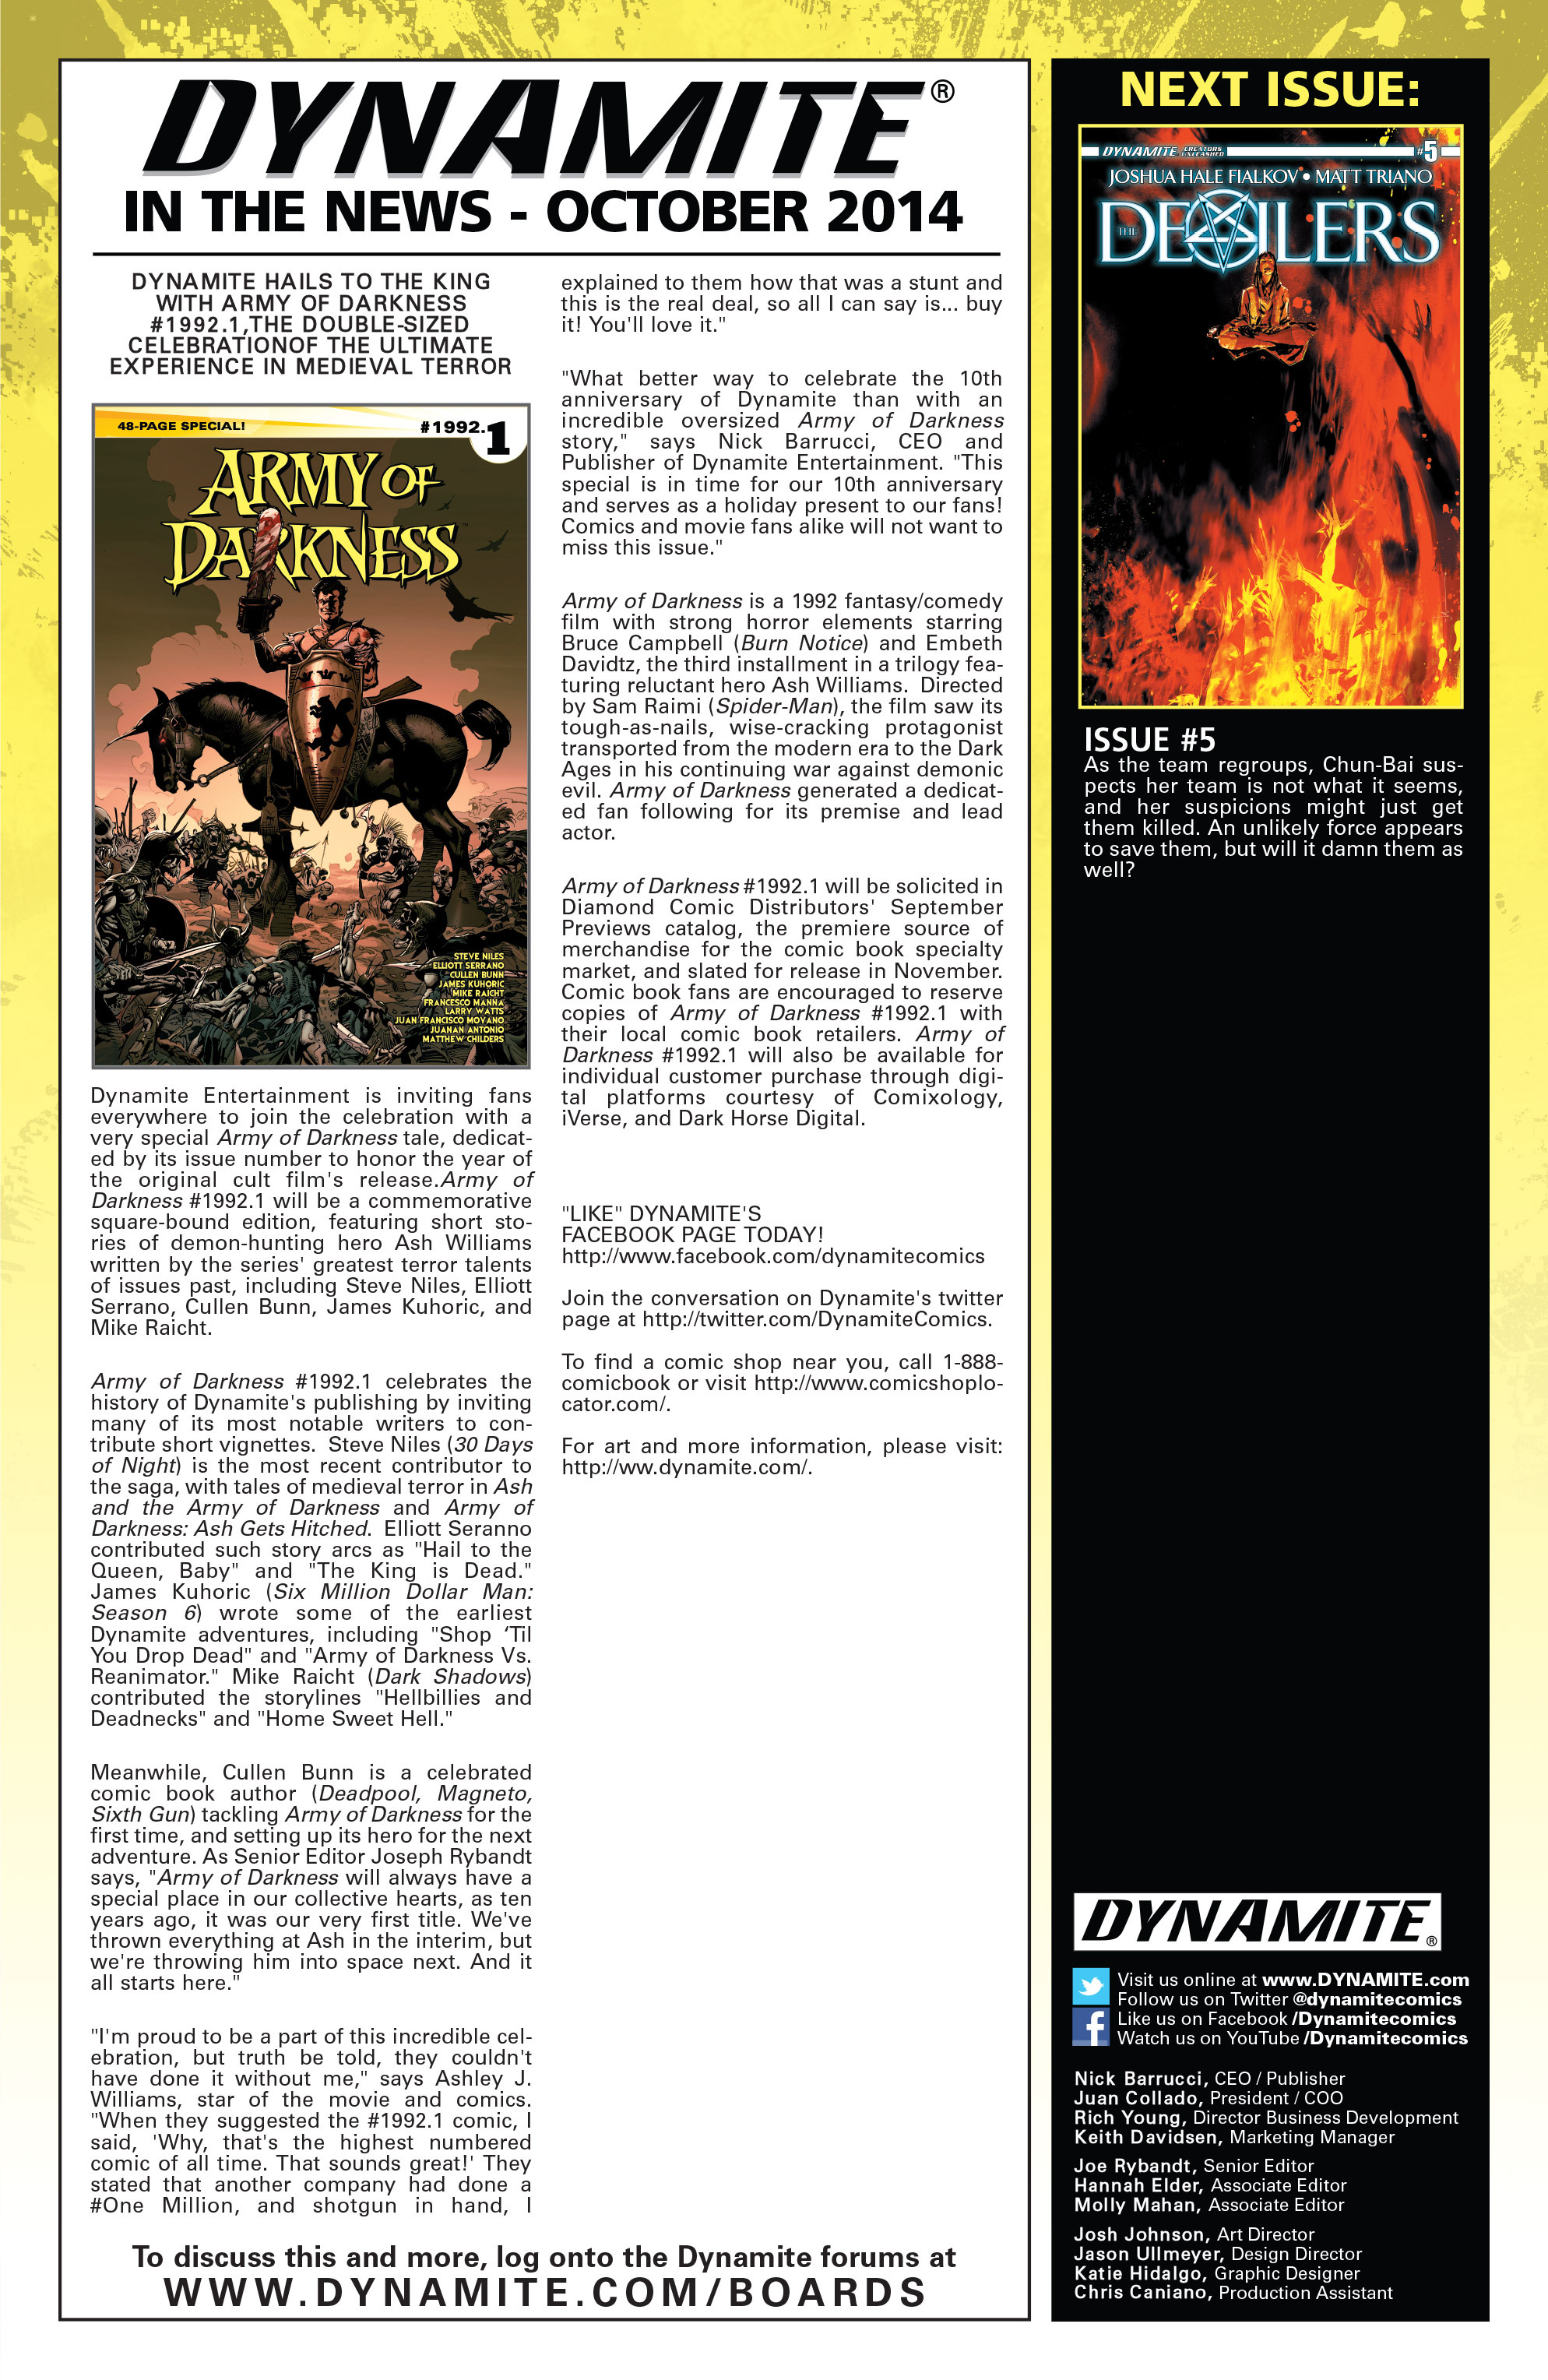 Read online The Devilers comic -  Issue #4 - 20